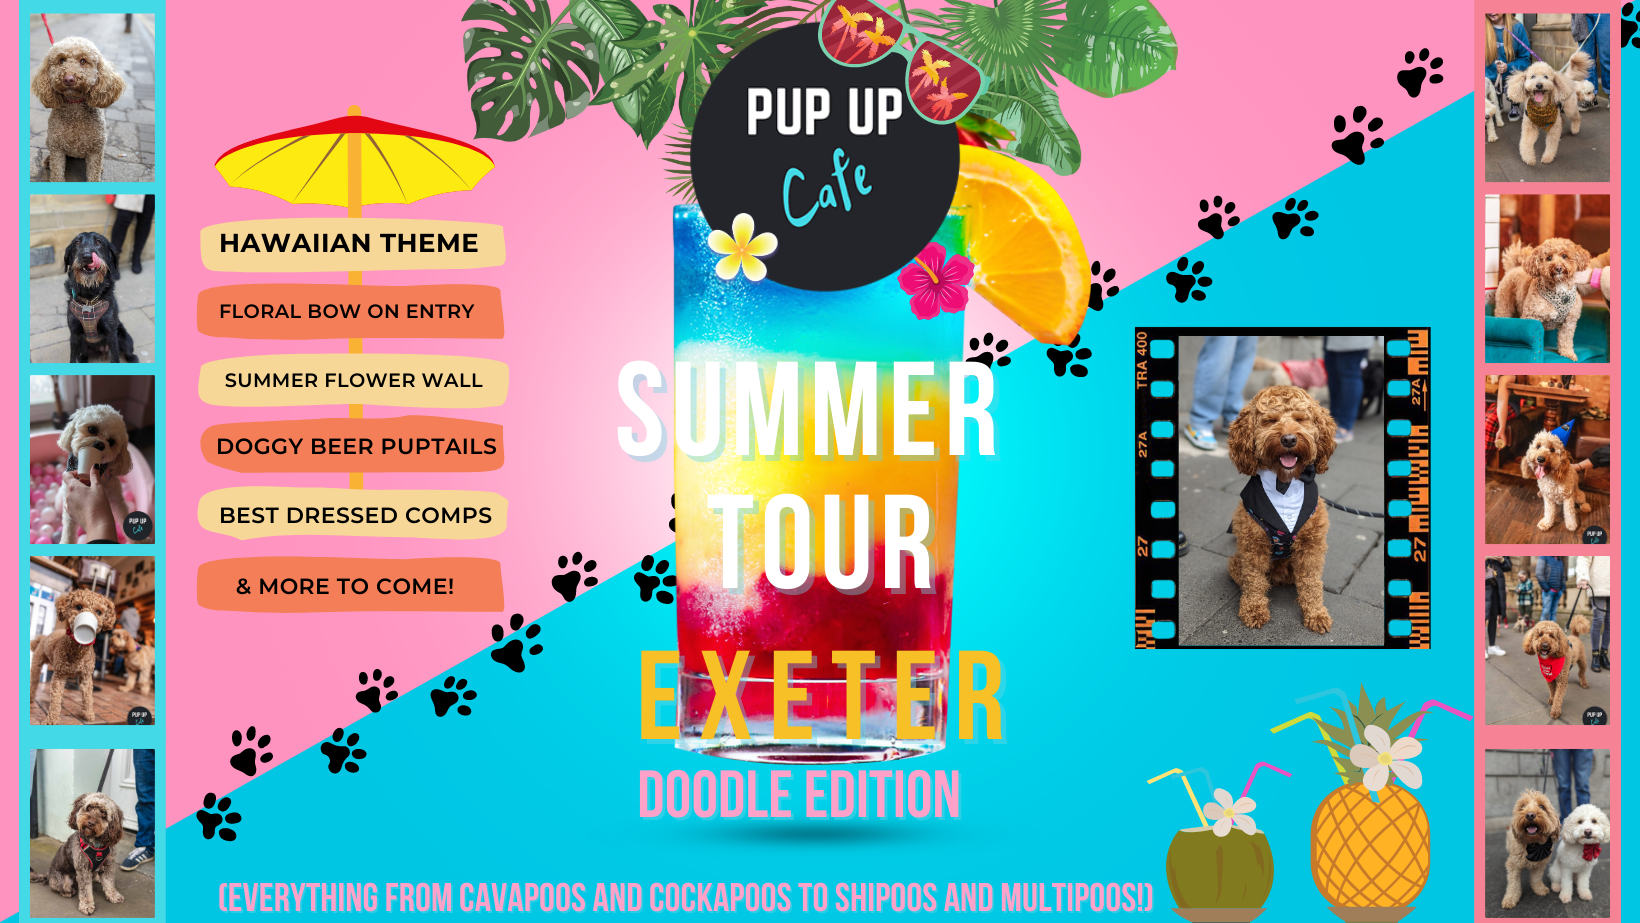 Doodle Pup Up Cafe – Exeter | SUMMER TOUR! 🌞